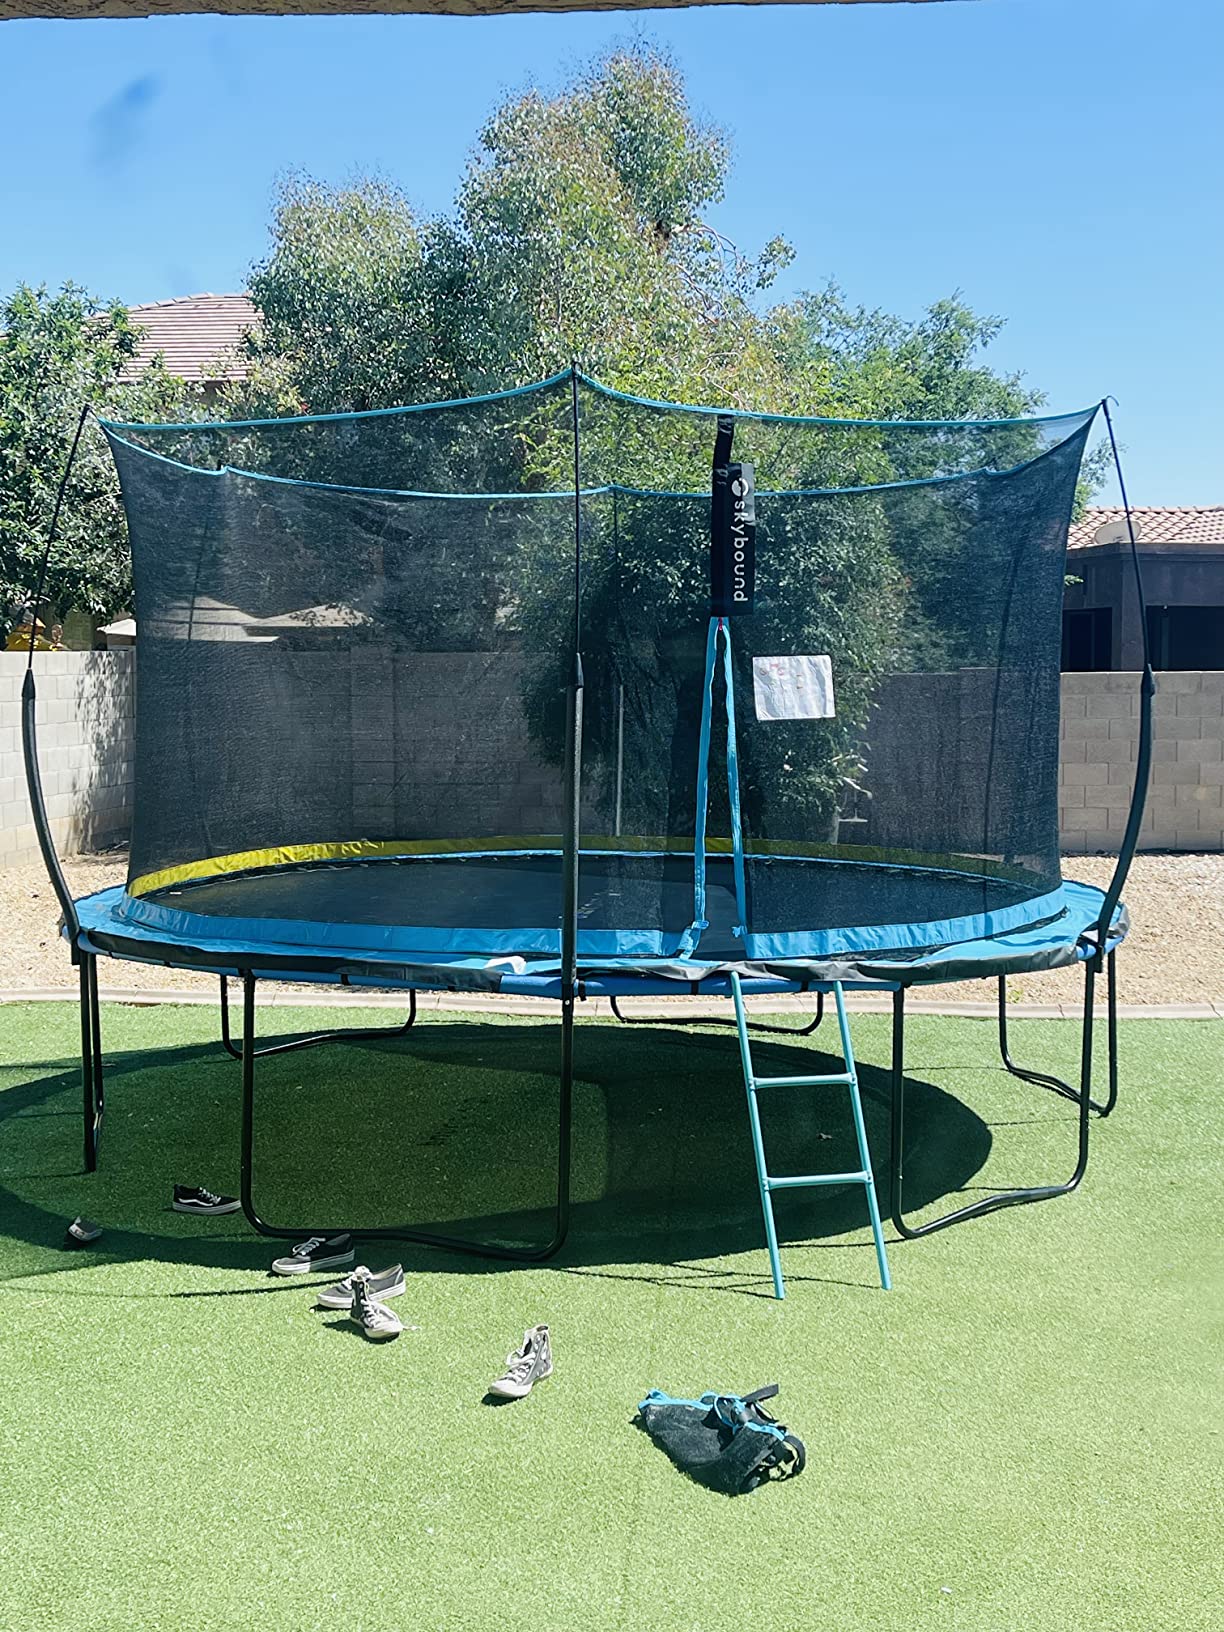 SKYBOUND_Photo_of_a_trampoline_in_the_backyard_from_a_real_client